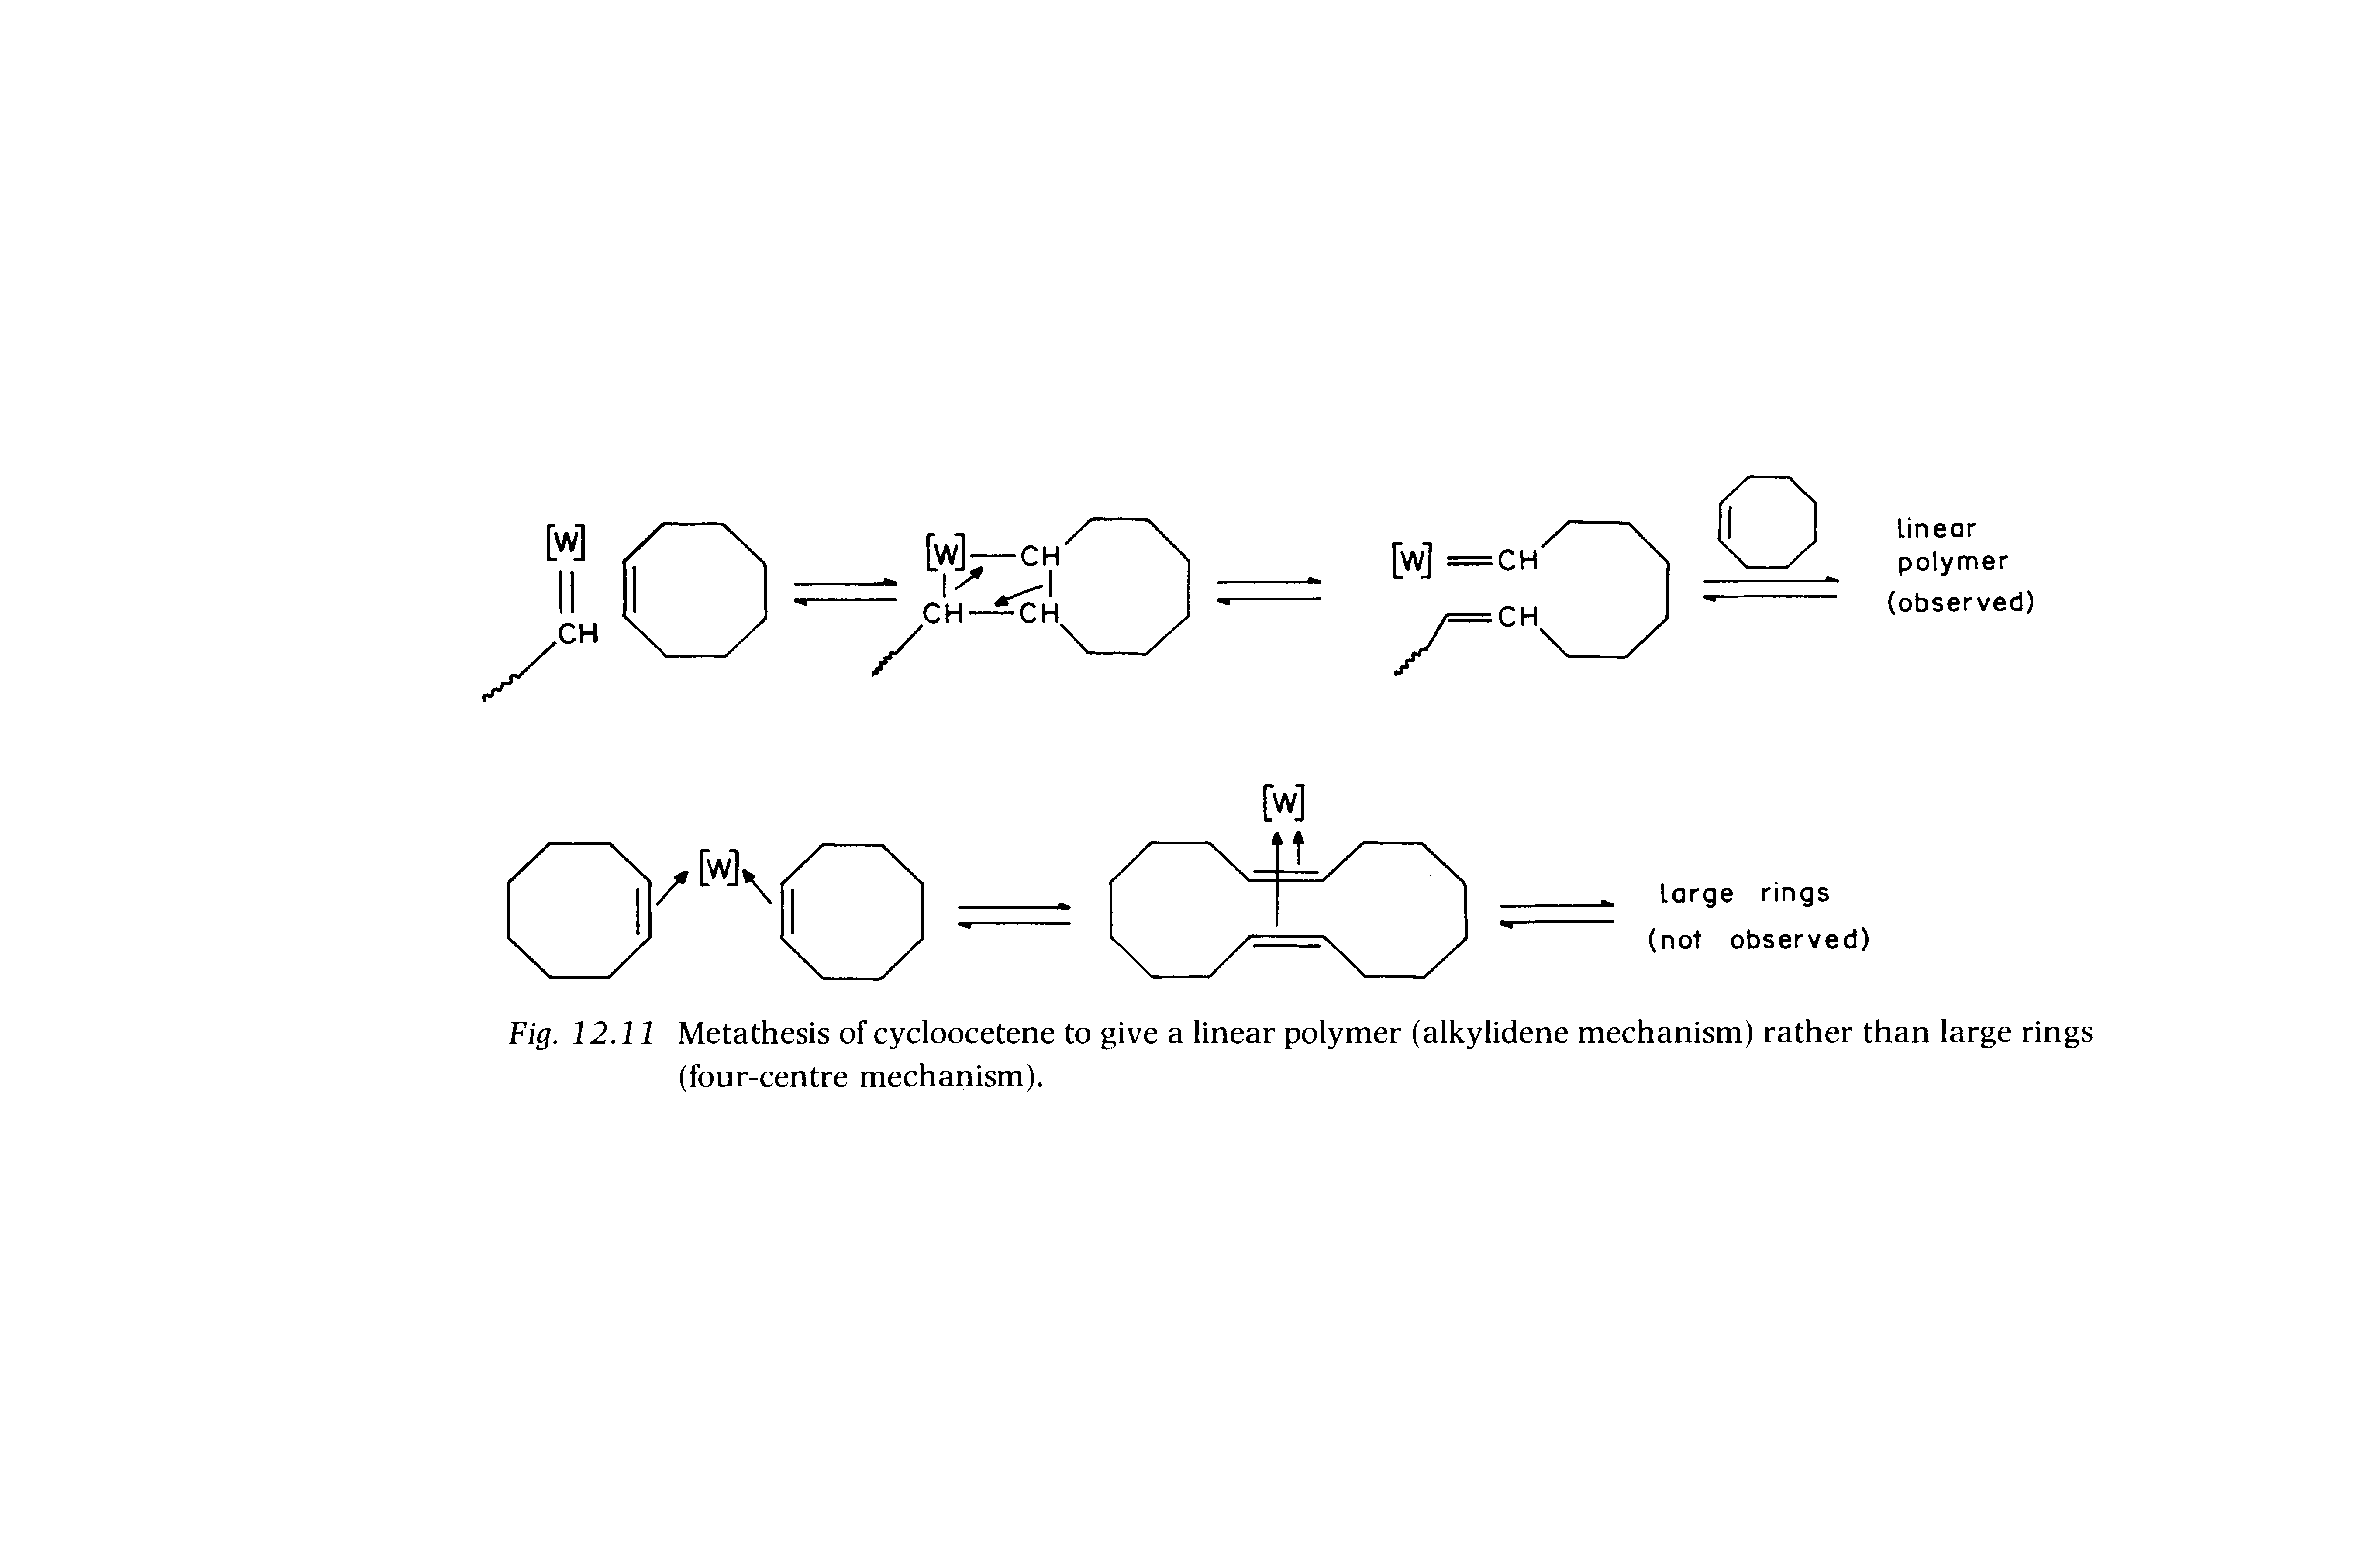 Fig. 12.11 Metathesis of cycloocetene to give a linear polymer (alkylidene mechanism) rather than large rings (four-centre mechanism).